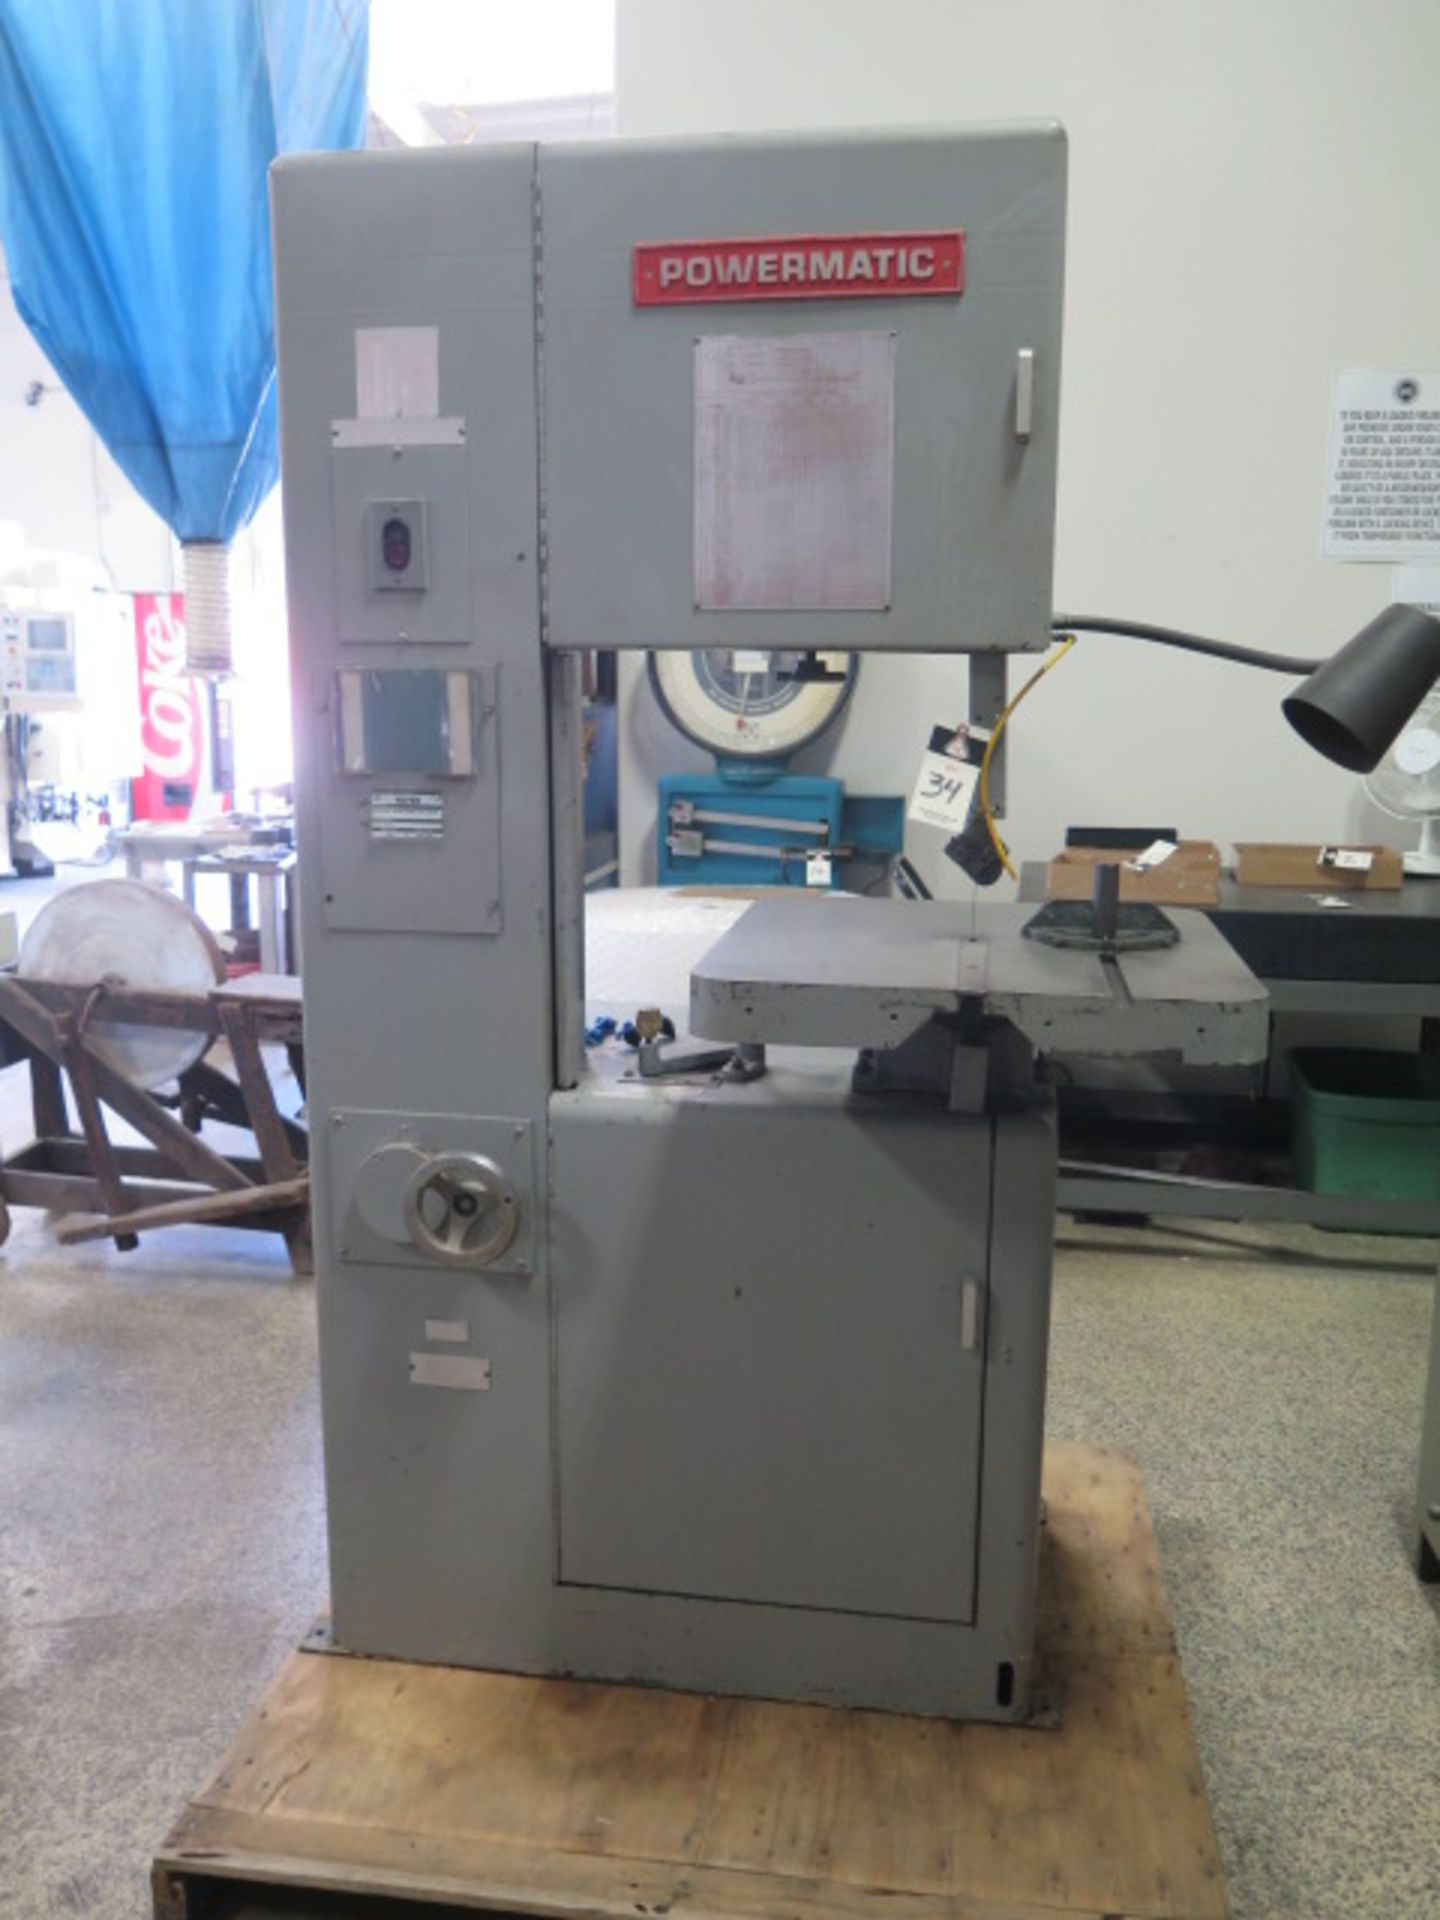 Powermatic mdl. 87 20” Vertical Band Saw s/n 487301 w/ 24” x 24” Miter Table